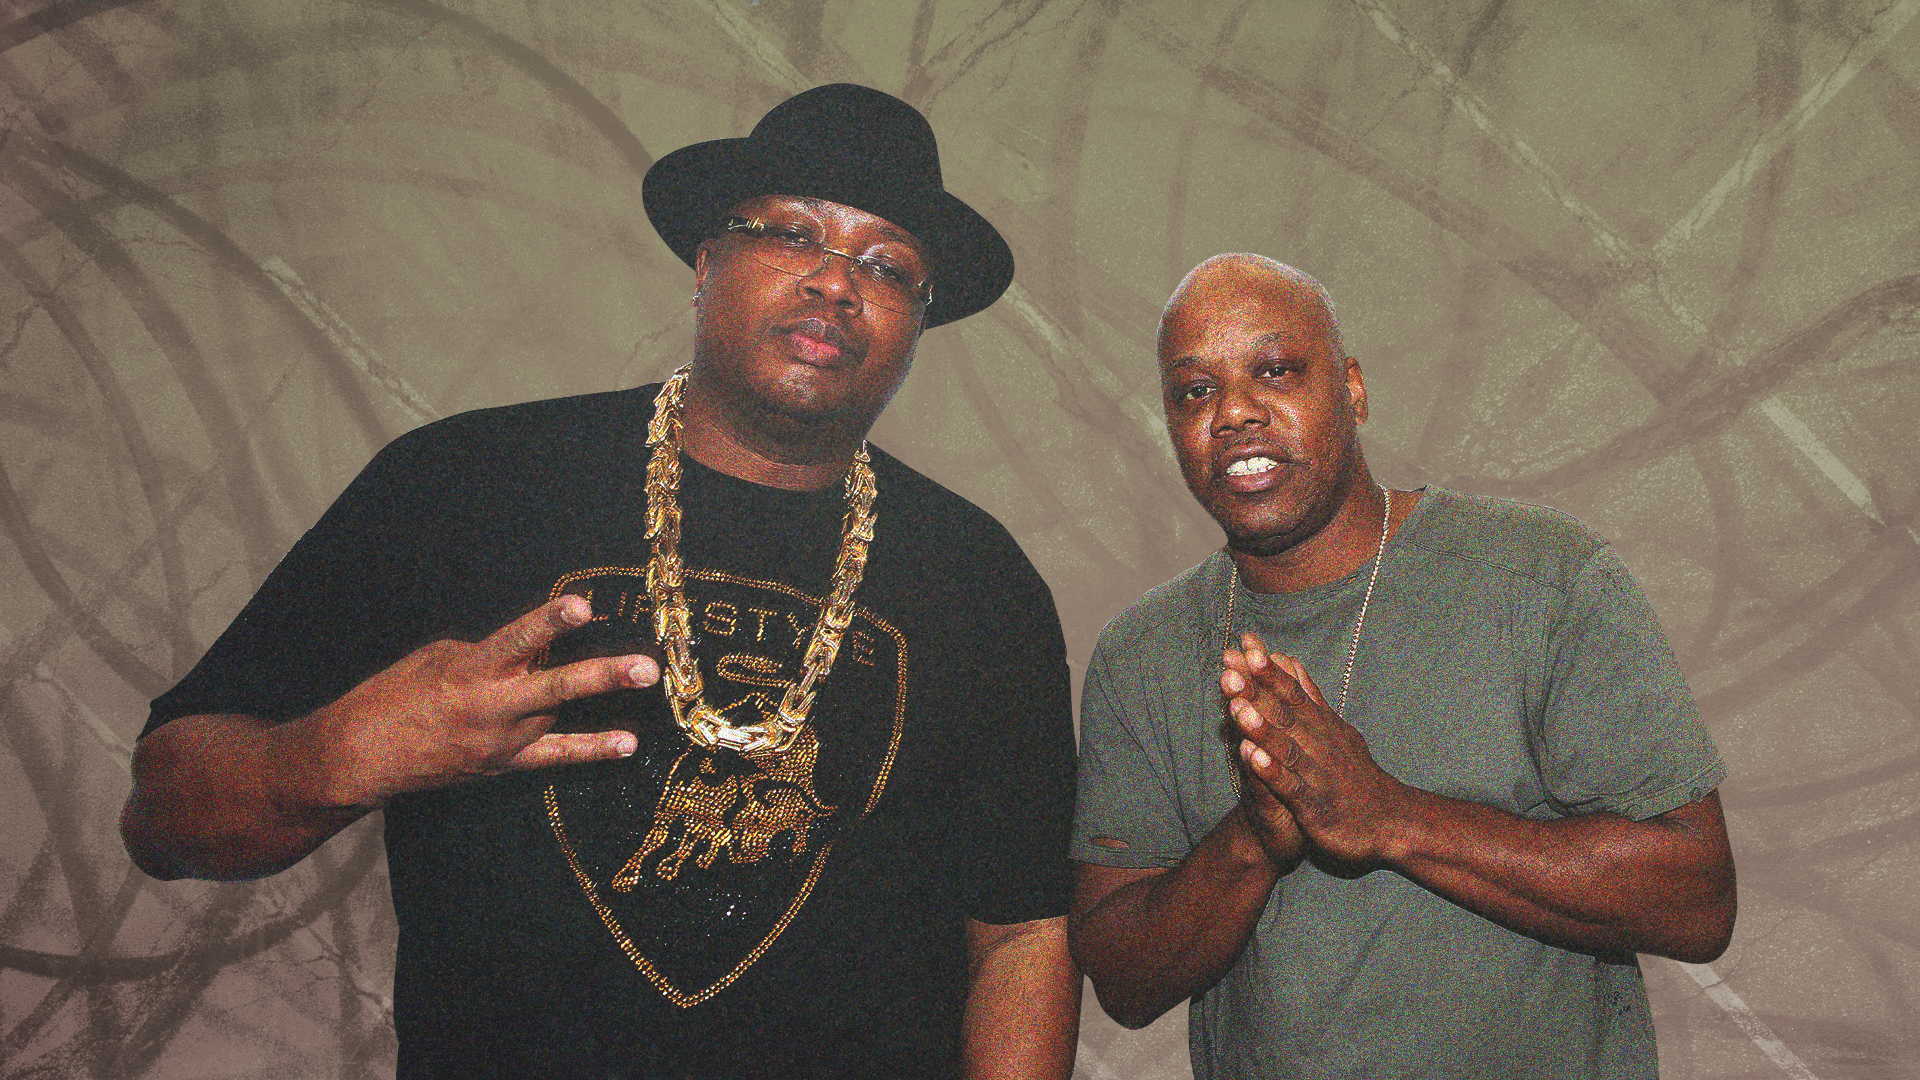 E-40 and Too Short Preview Bay Area 'Verzuz' Battle: 'We Never Get Our  Shine Like We Should